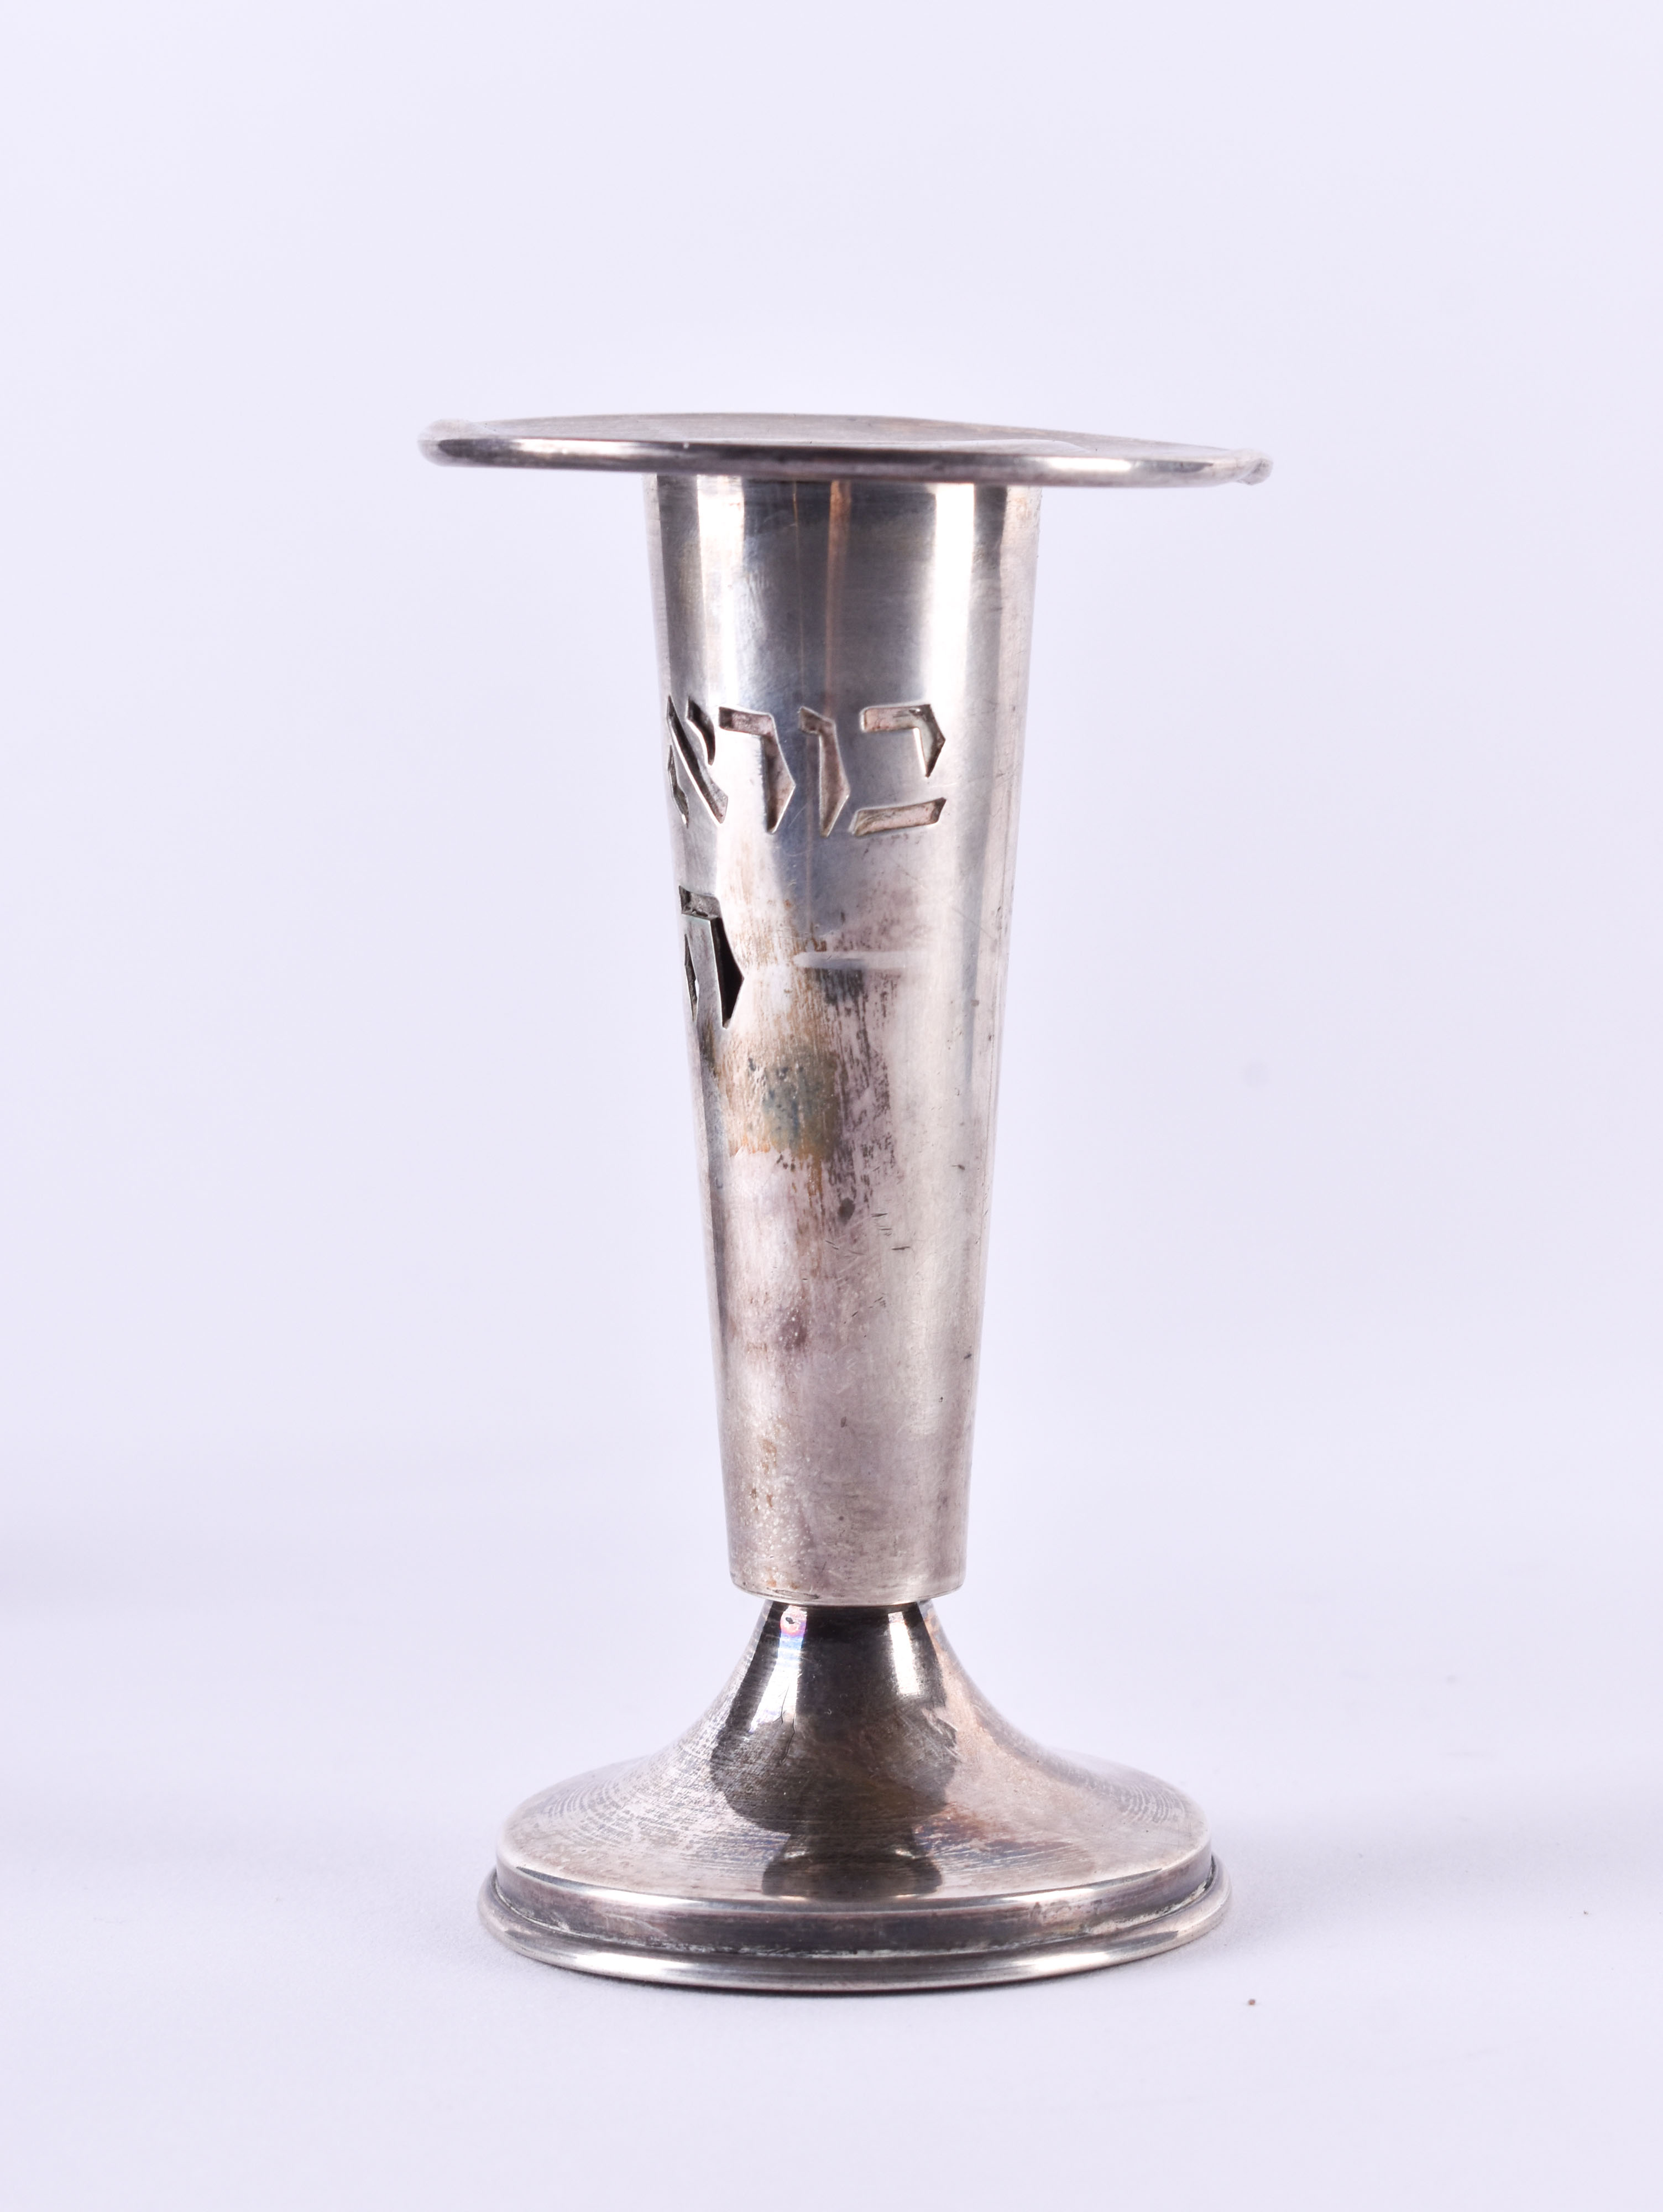 Silver candlestick Judaica - Image 3 of 4